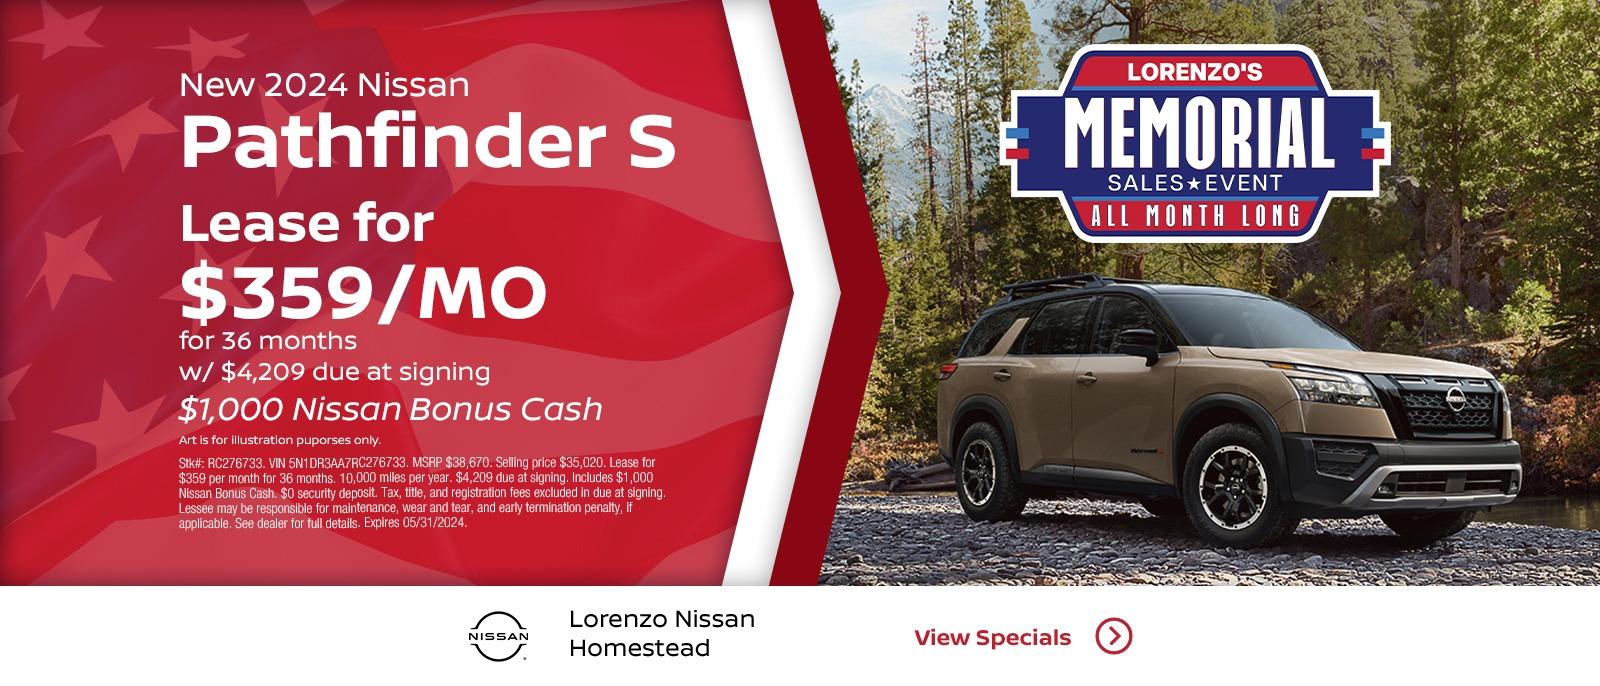 2023 Nissan PATHFINDER S
STOCK #RC276733
MSRP: $38,670
SELLING PRICE: $35,020
Lease for $359 + tax per month
36 months | 10000 miles | $4209 down payment
$1000 BONUS CASH